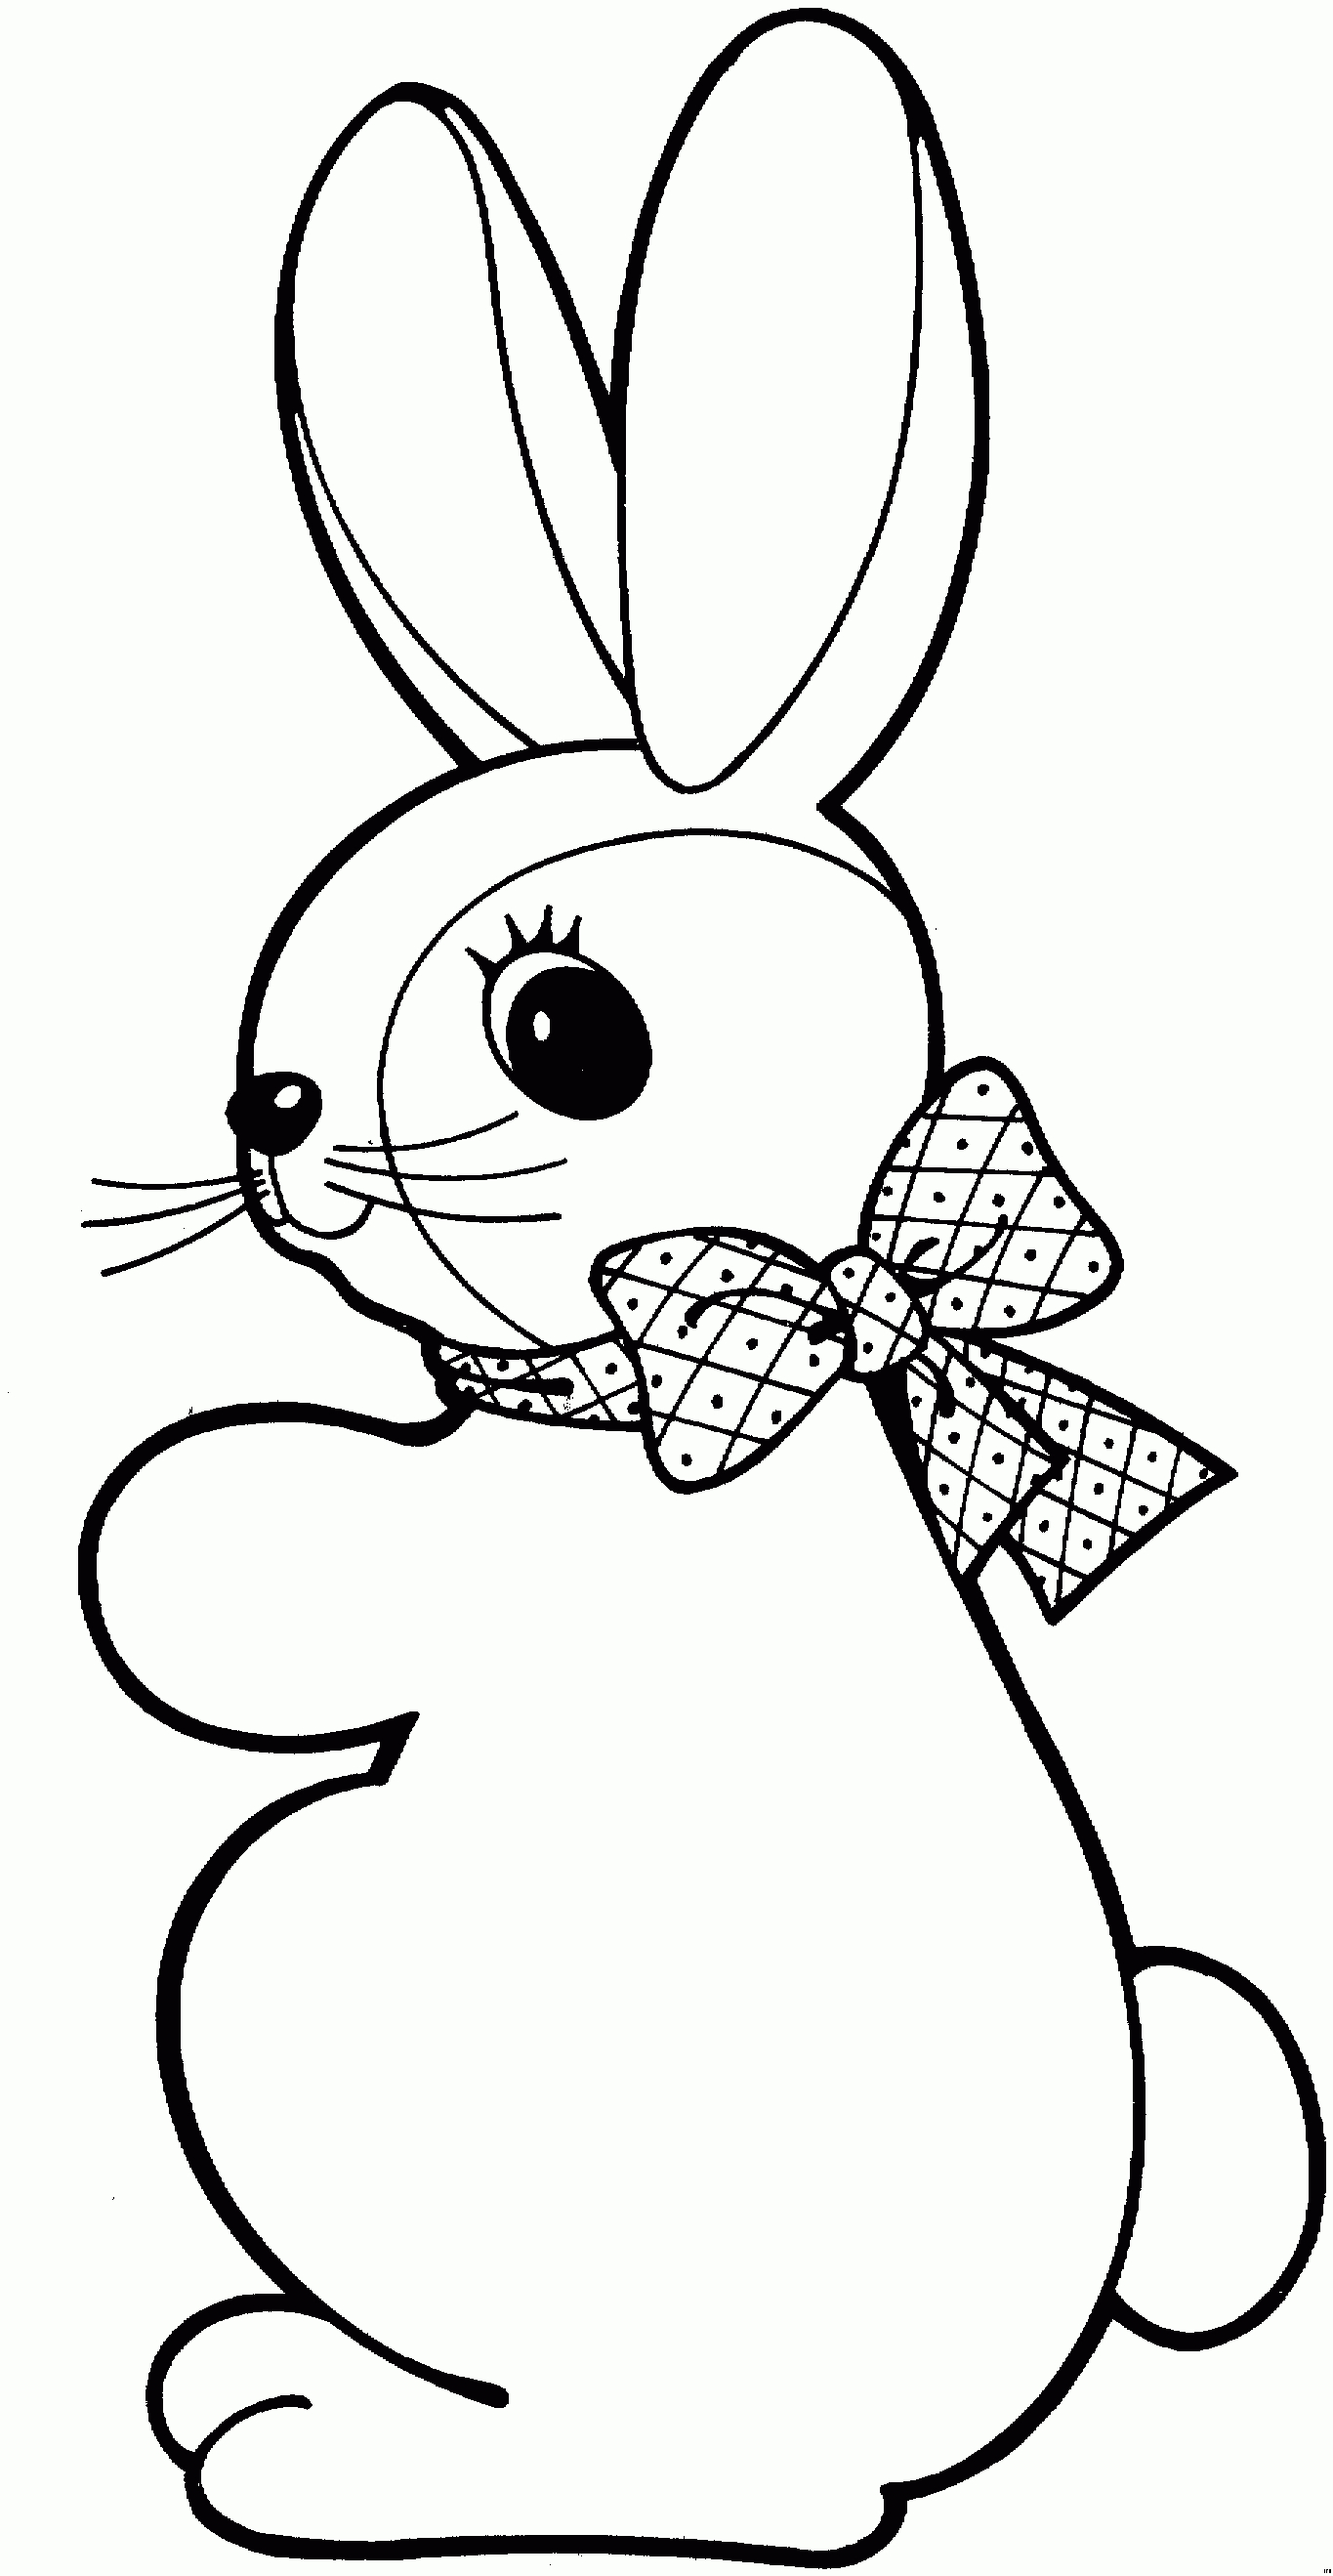 Rabbit coloring page to download for free